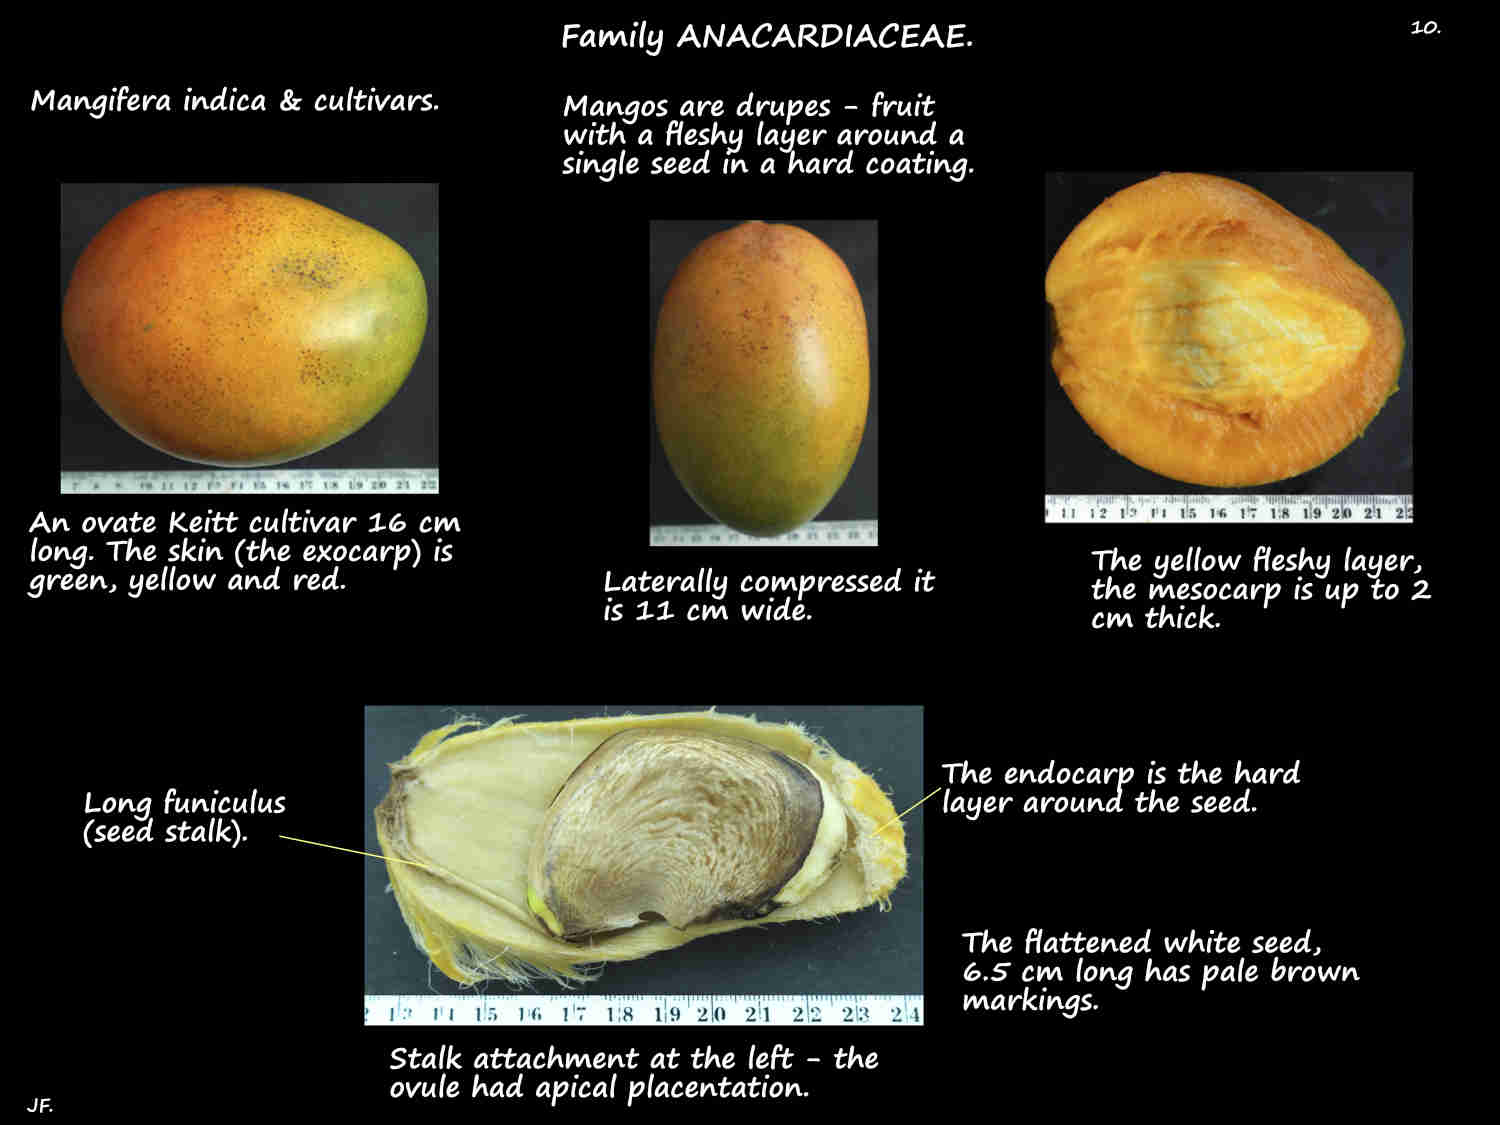 10 The structure of Mango drupes